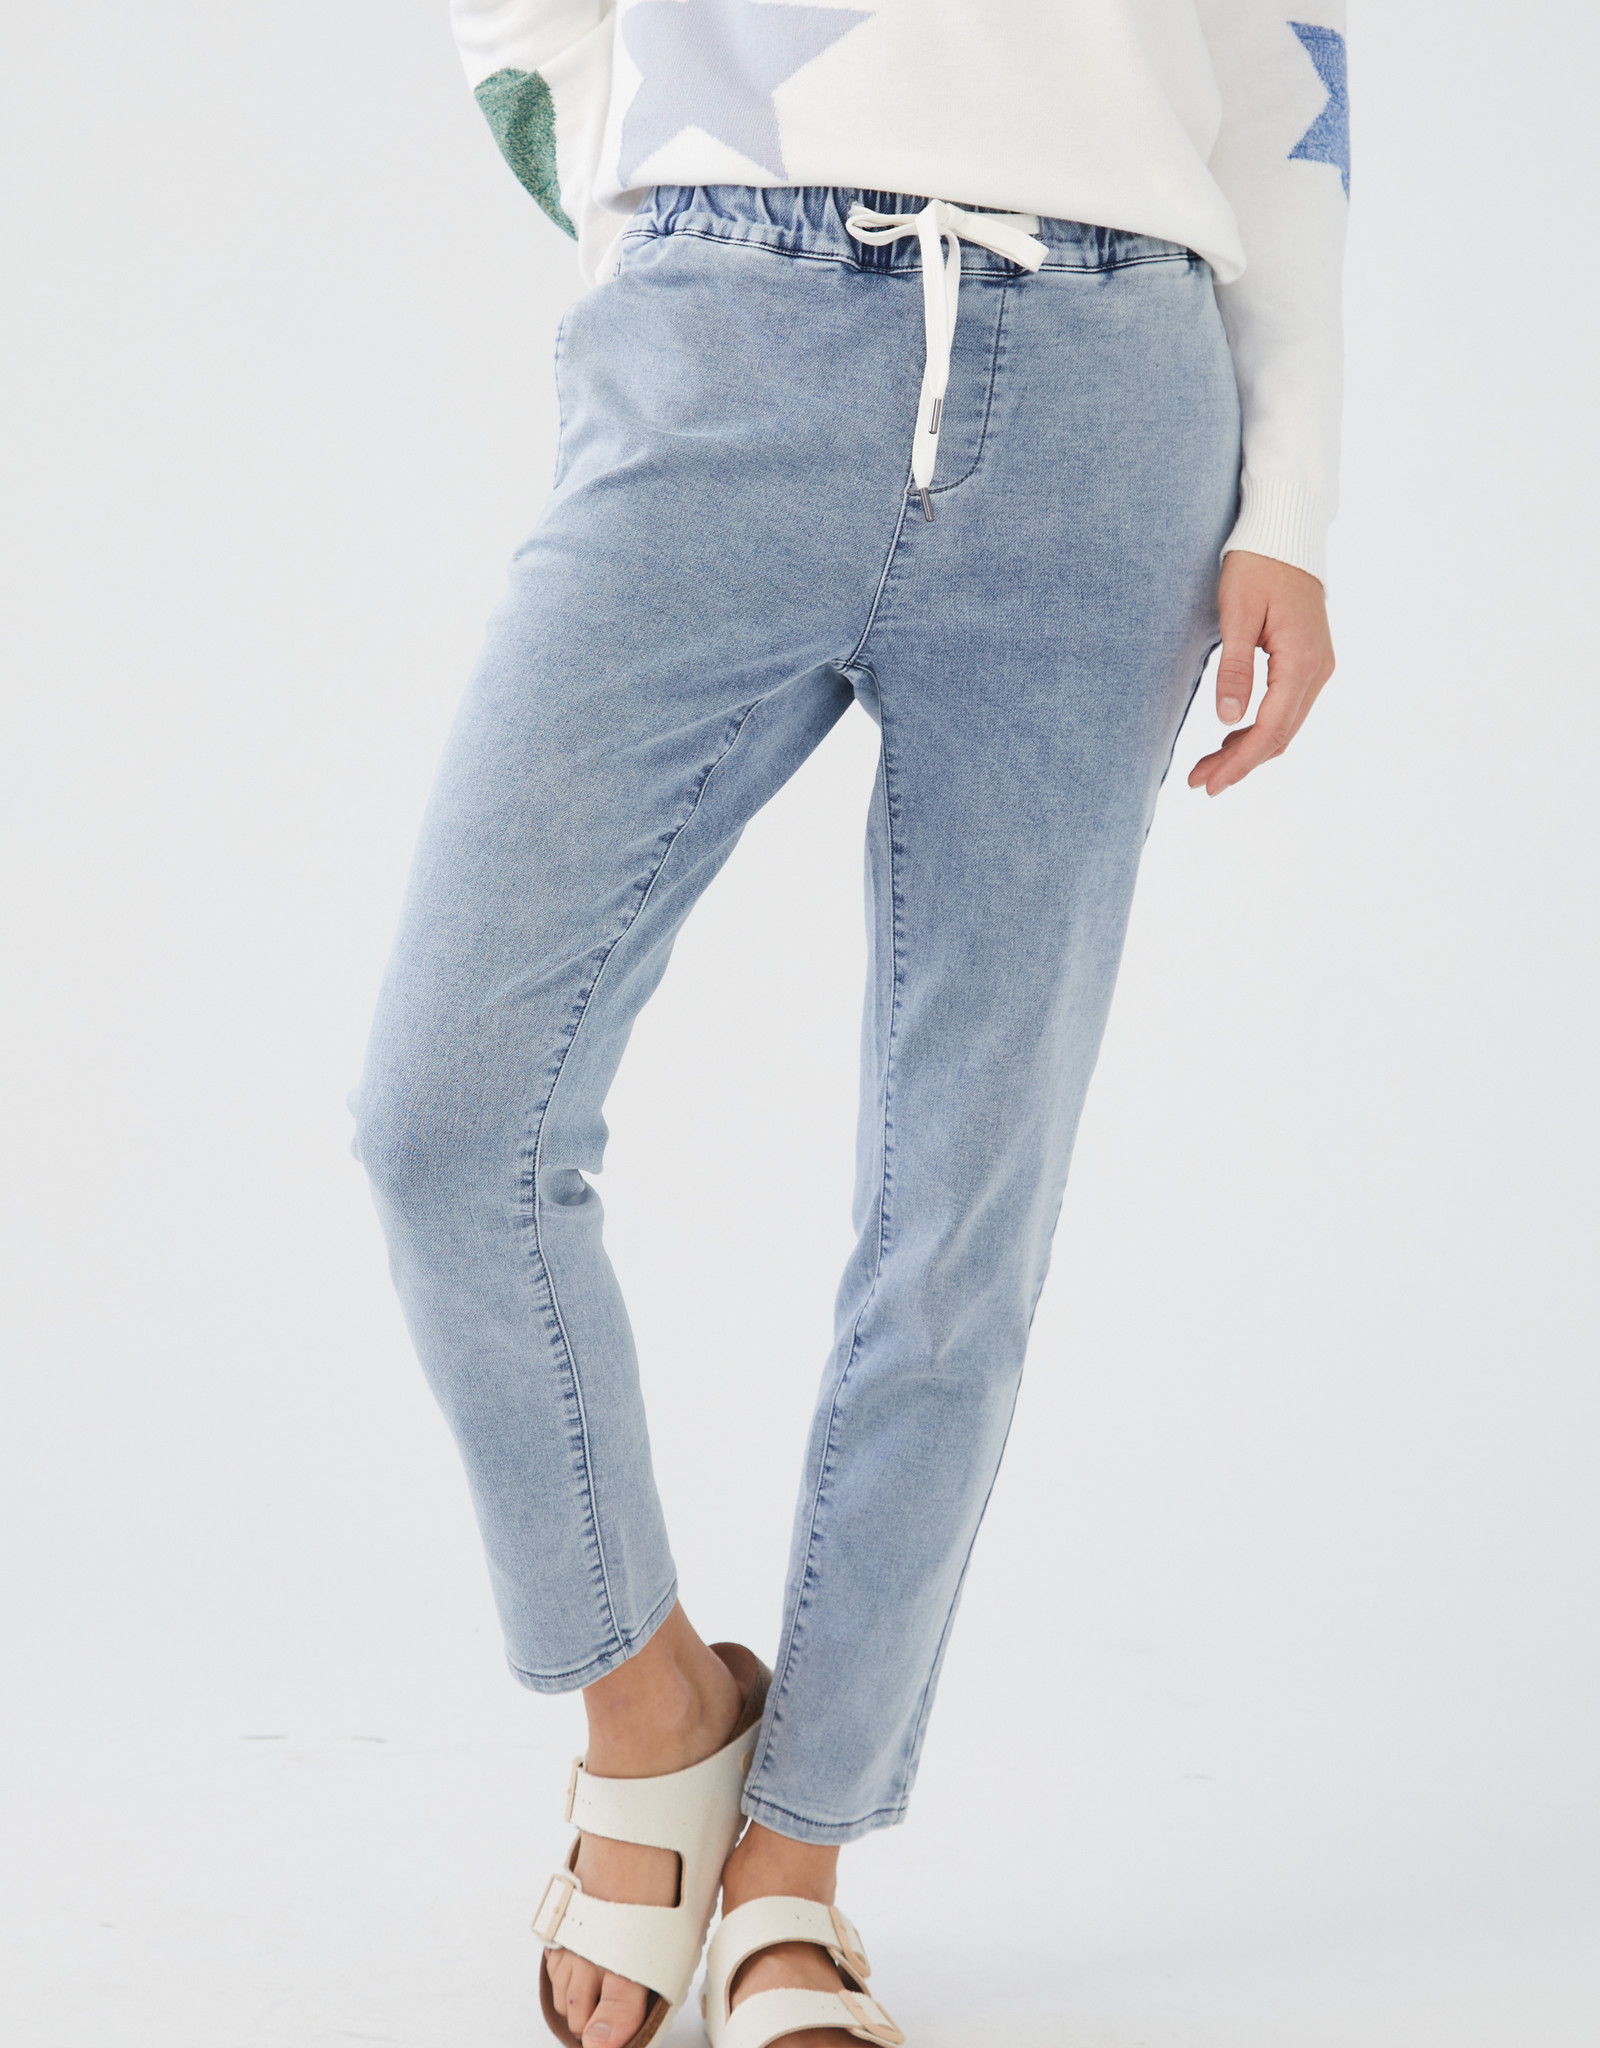 French Dressing Jeans FDJ 2869711 Pull On Jogger Ankle Jeans with Drawstring Waist